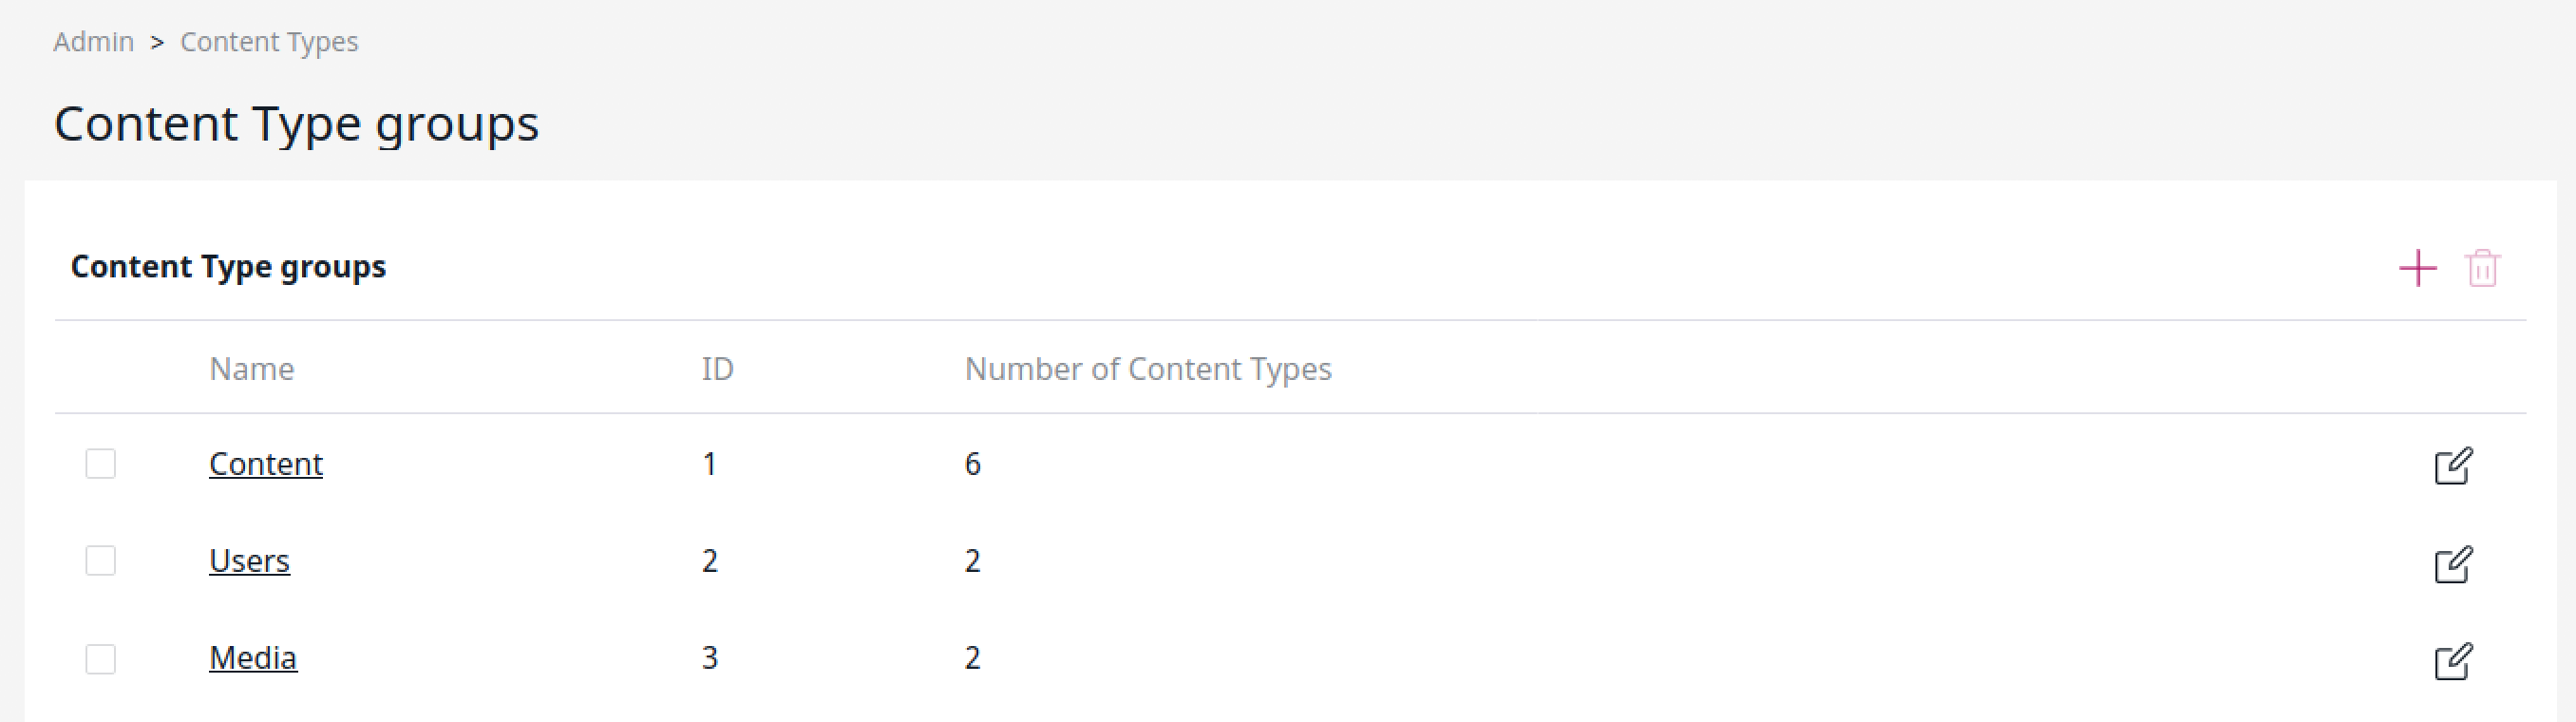 Content Type groups